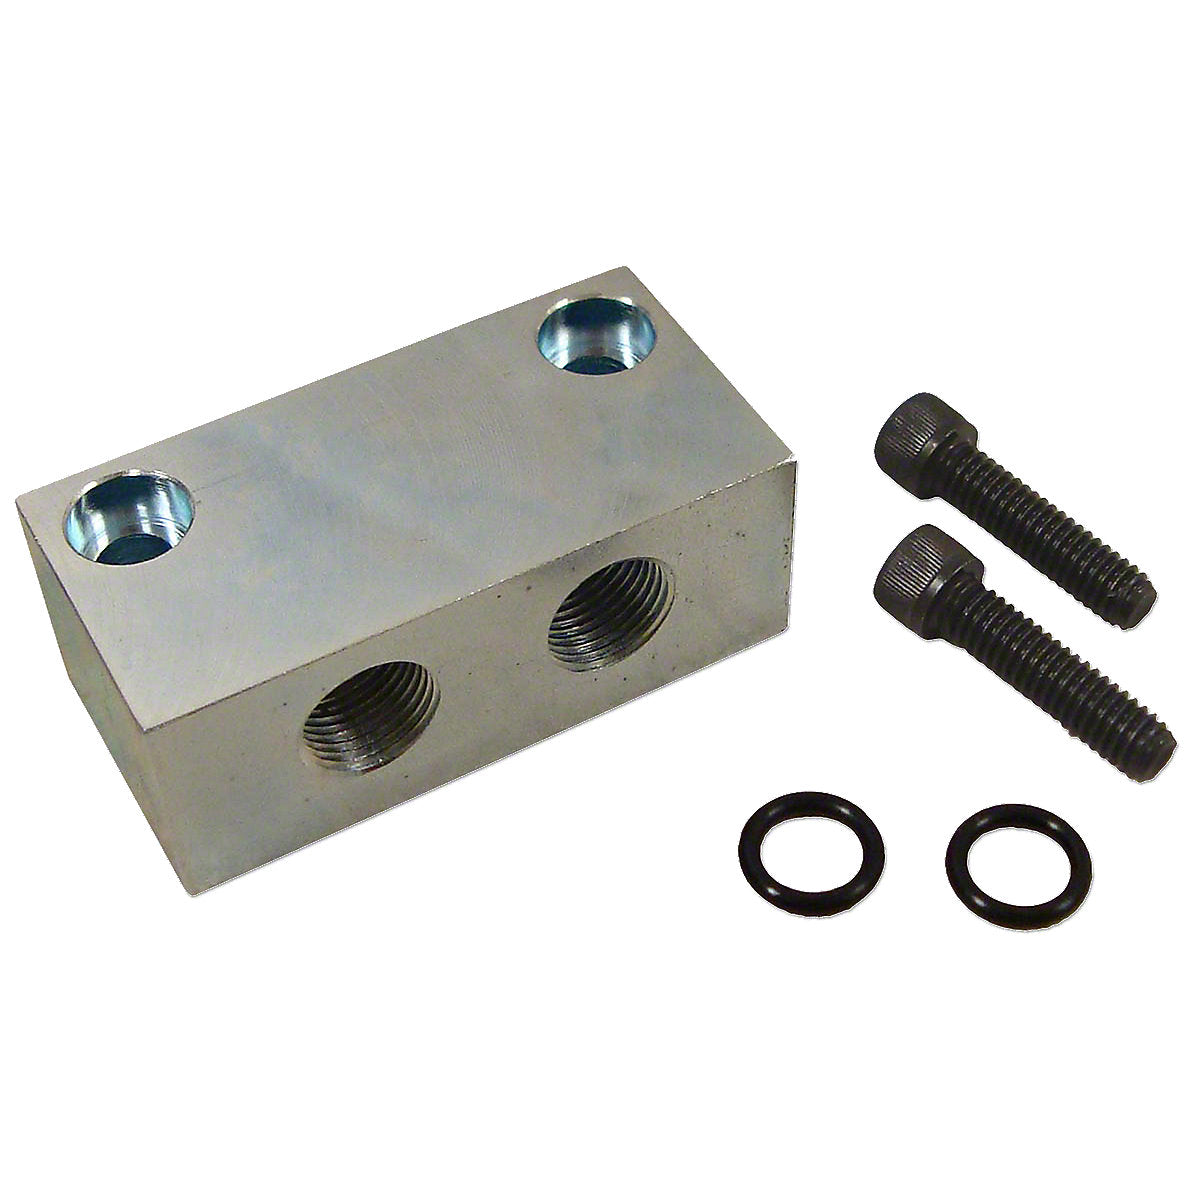 Port Block Kit only -Fits  Minneapolis Moline  Tractor